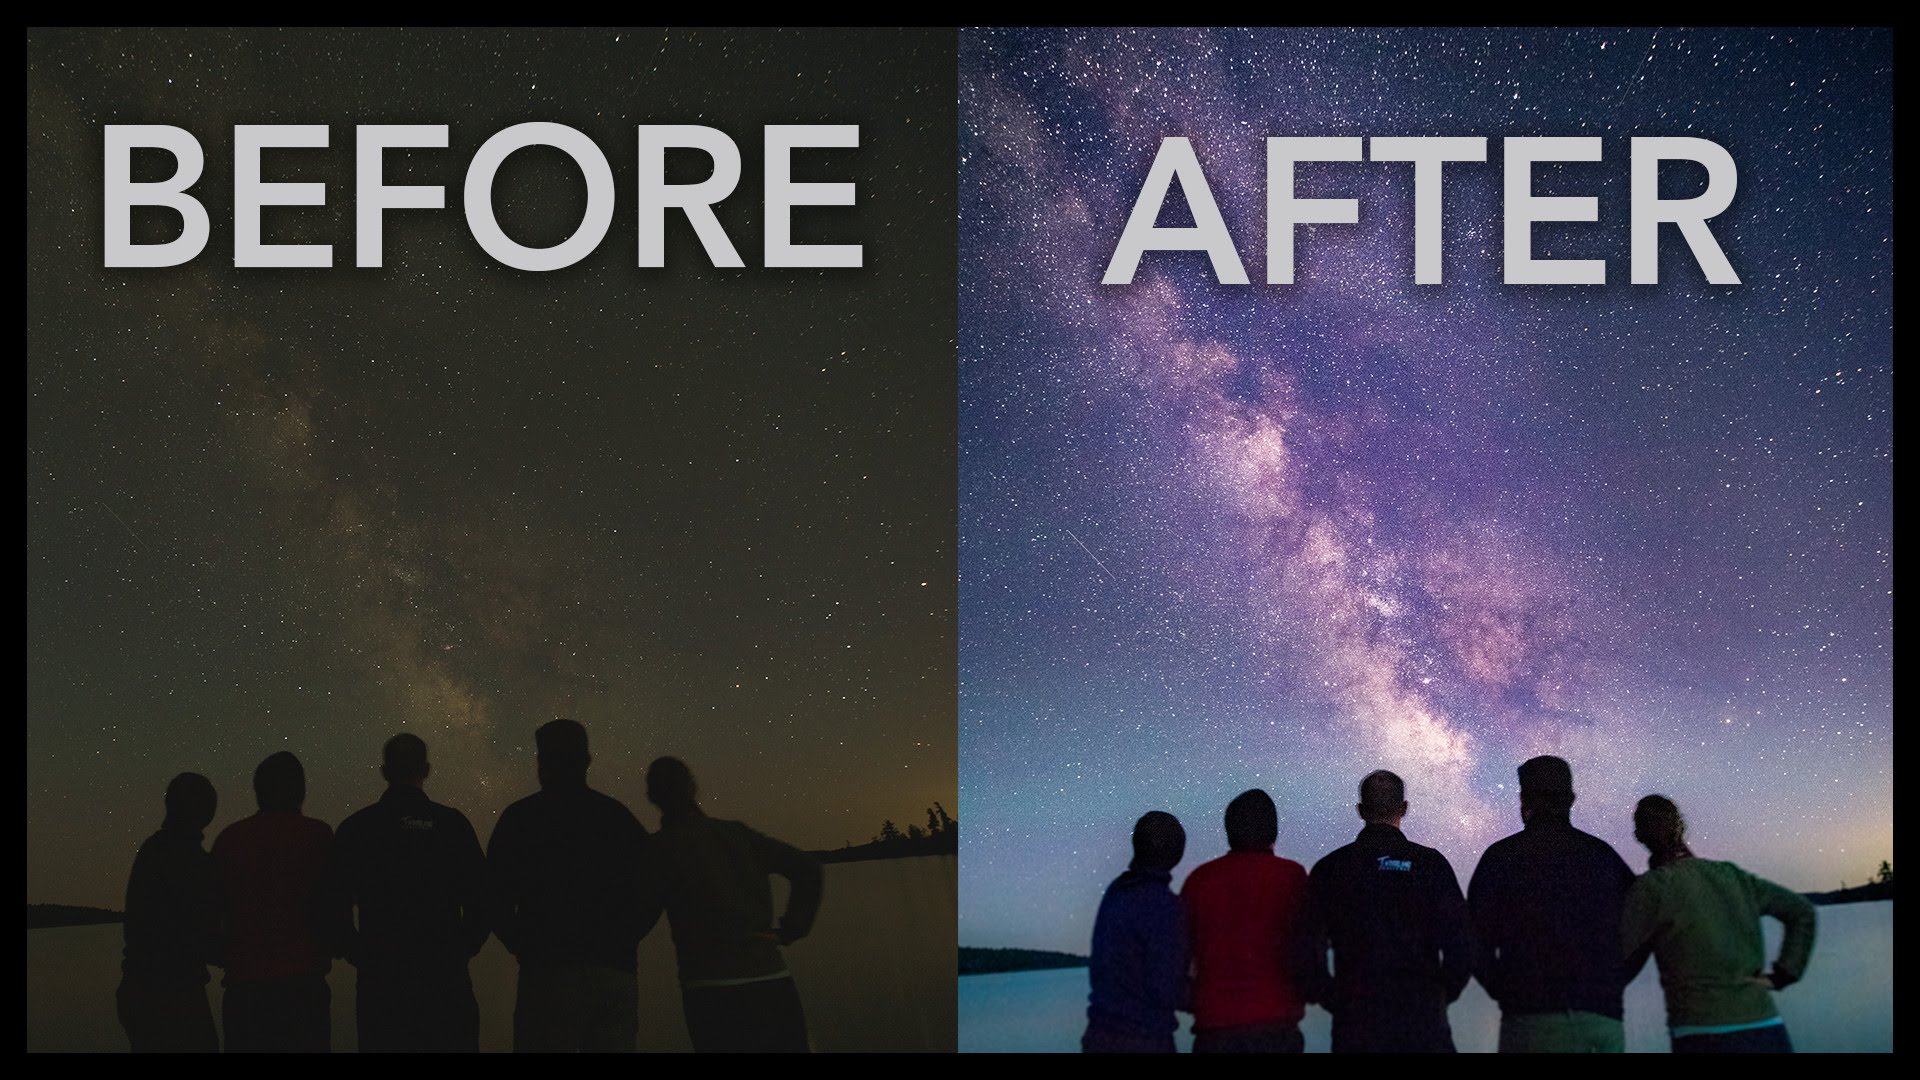 Before After Milkyway